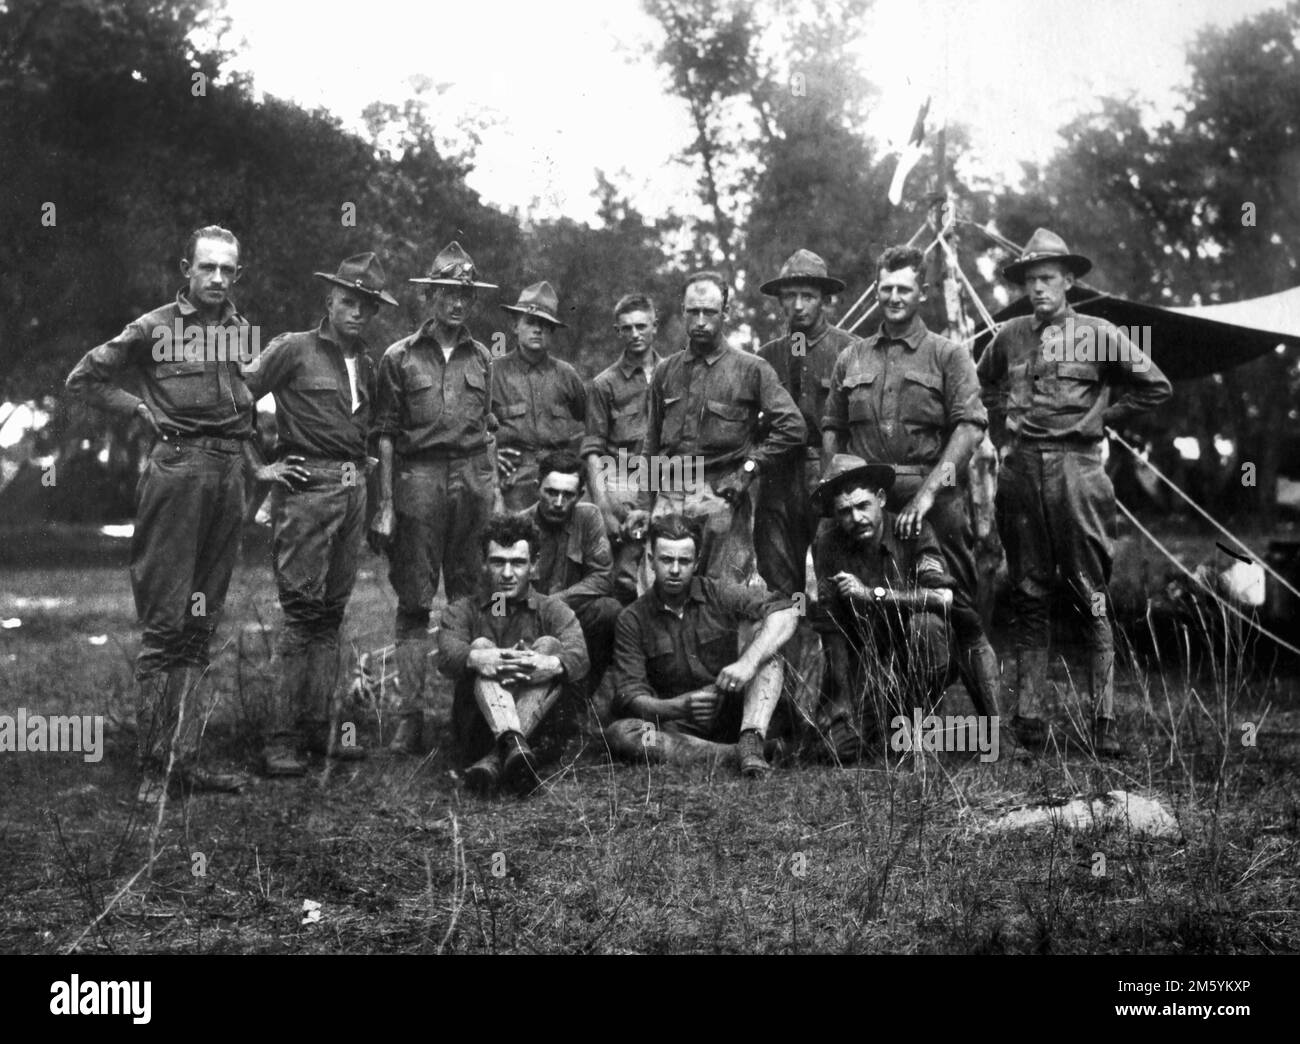 World War 1 American soldiers c. 1917 at training camp in Texas Stock Photo